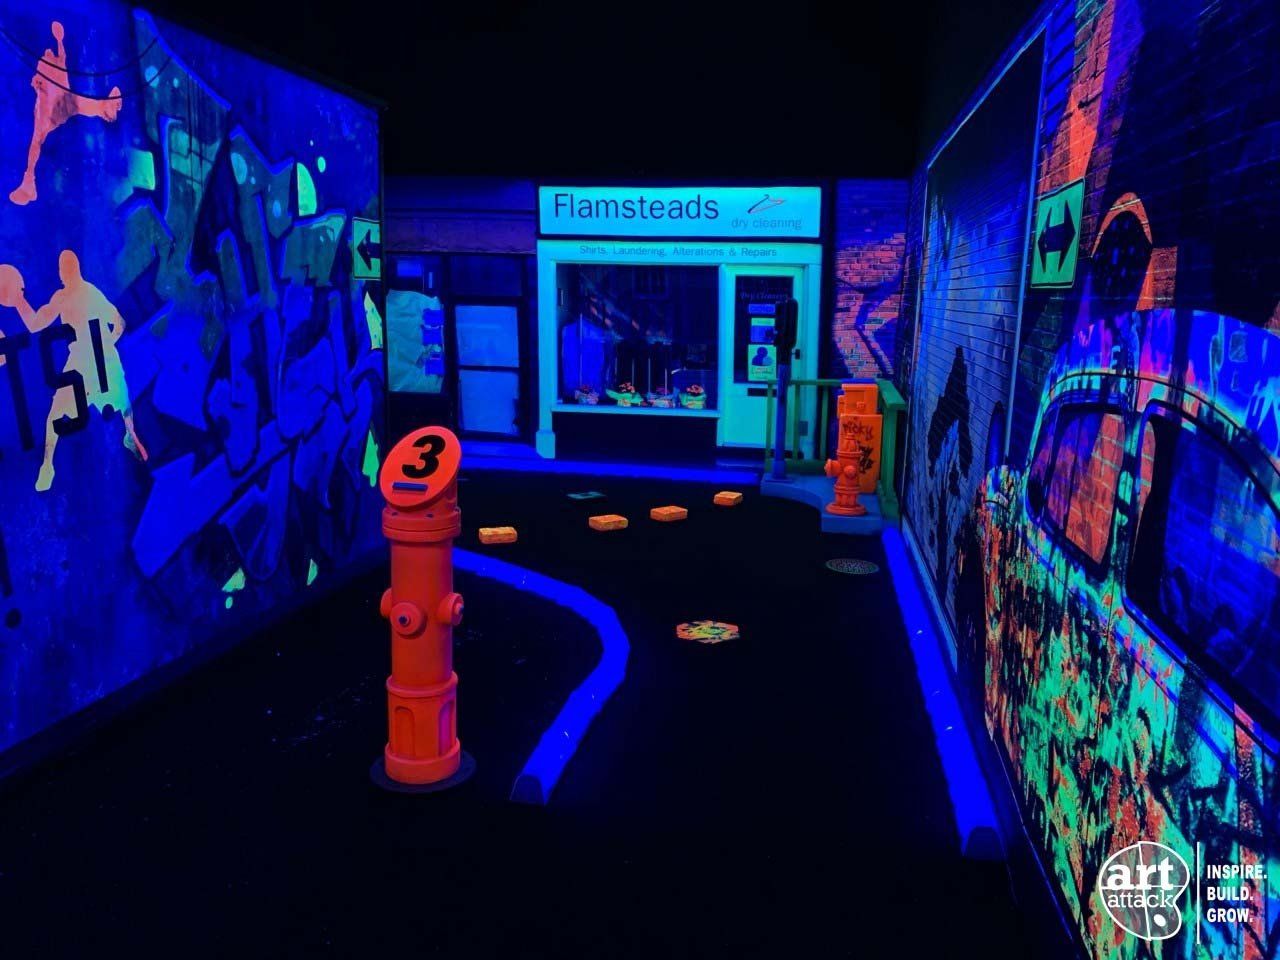 HD Black Light mini golf hole featuring tiger course designed and installed by art attack